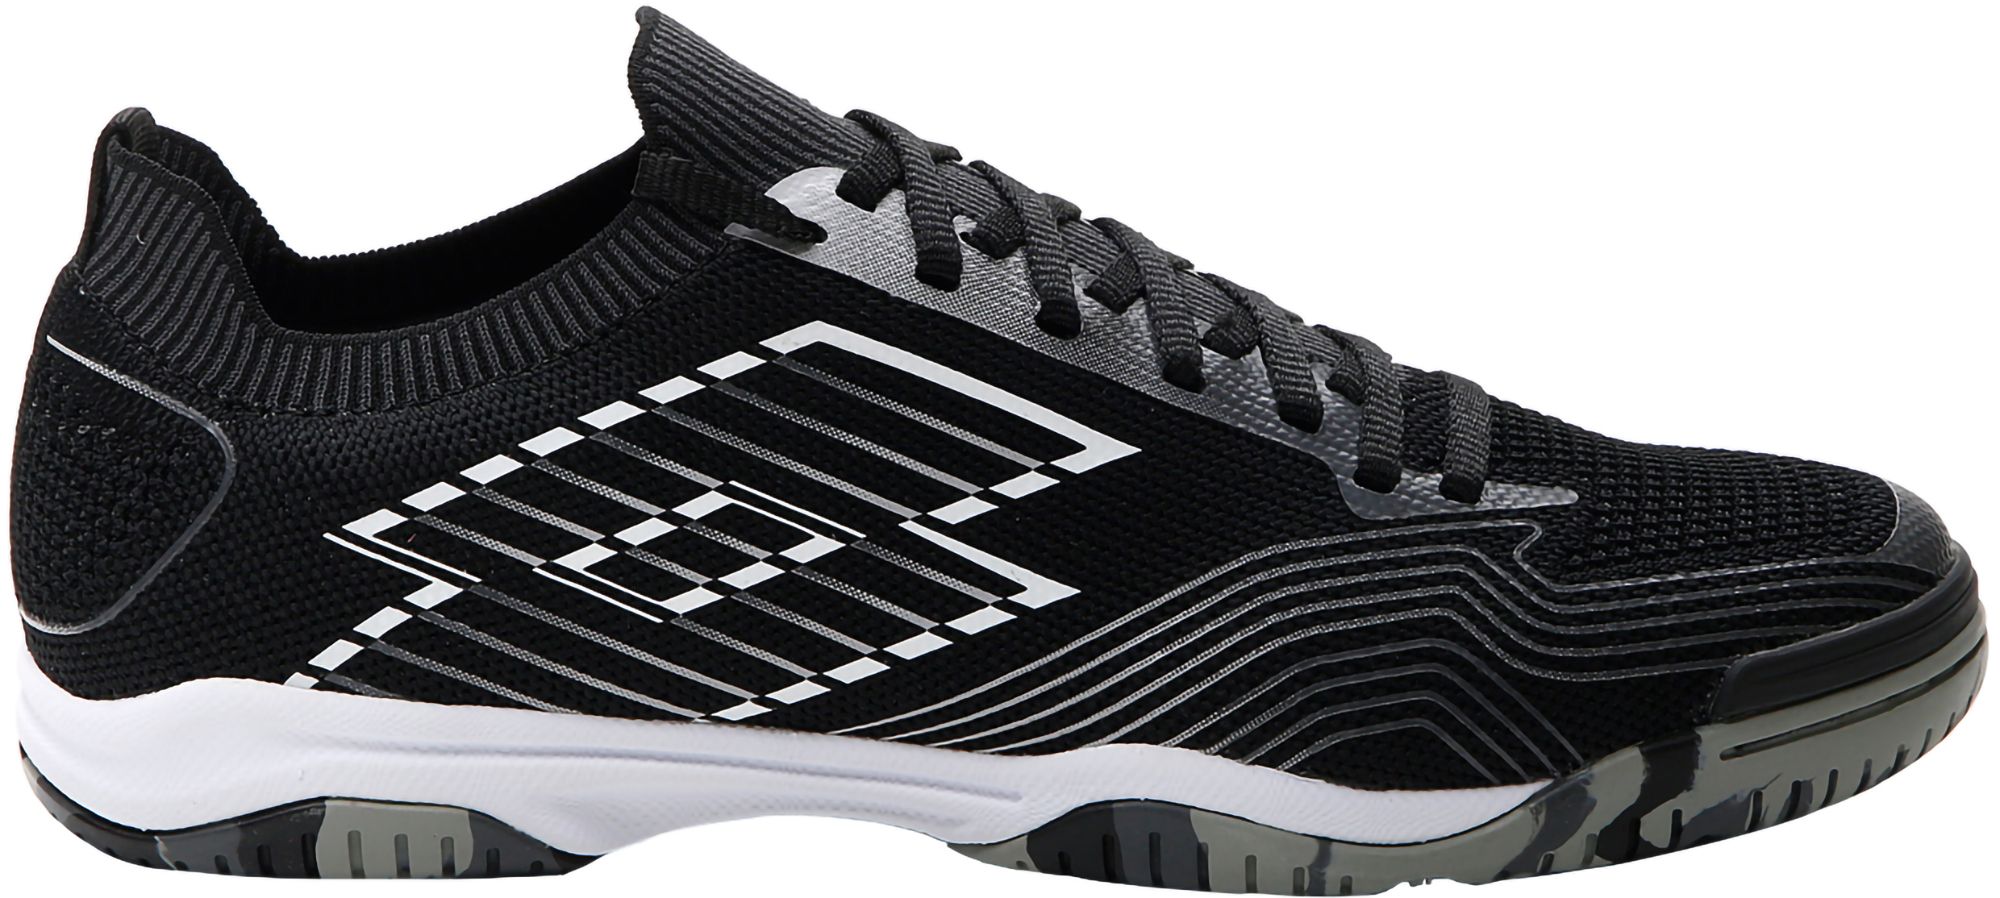 Lotto Tacto 250 Indoor Soccer Shoes